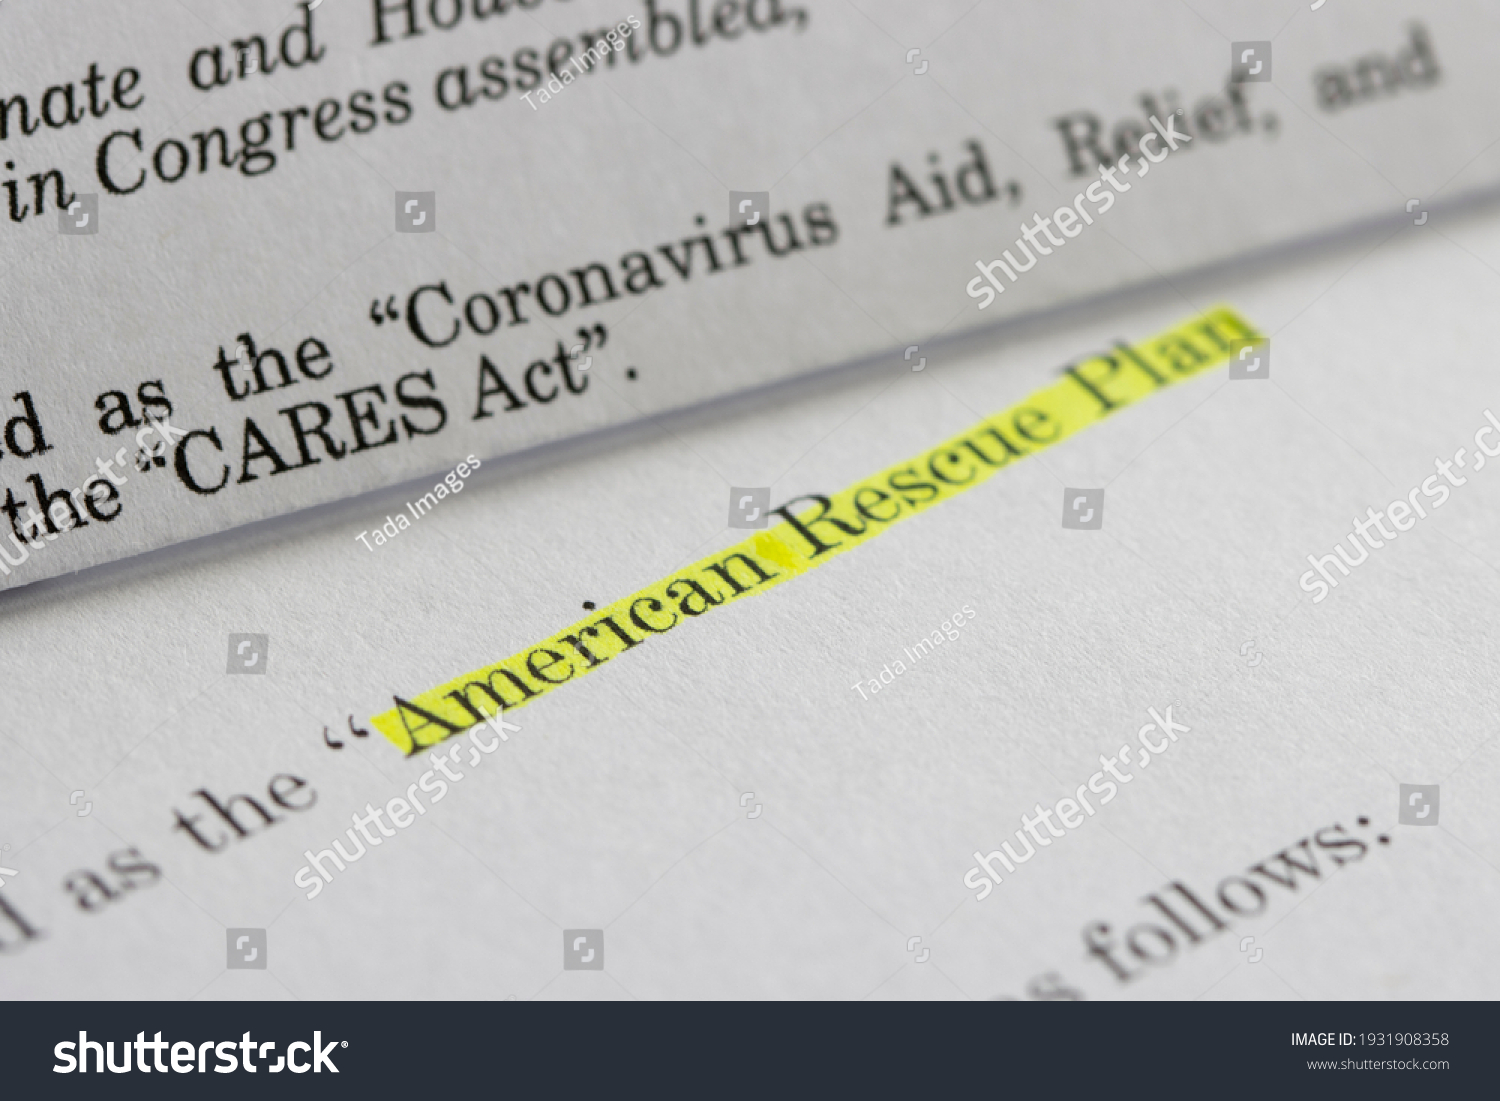 Closeup of the documents of both the Cares Act (Coronavirus Aid, Relief, and Economic Security Act) and the American Rescue Plan Act (ARPA) of 2021. #1931908358